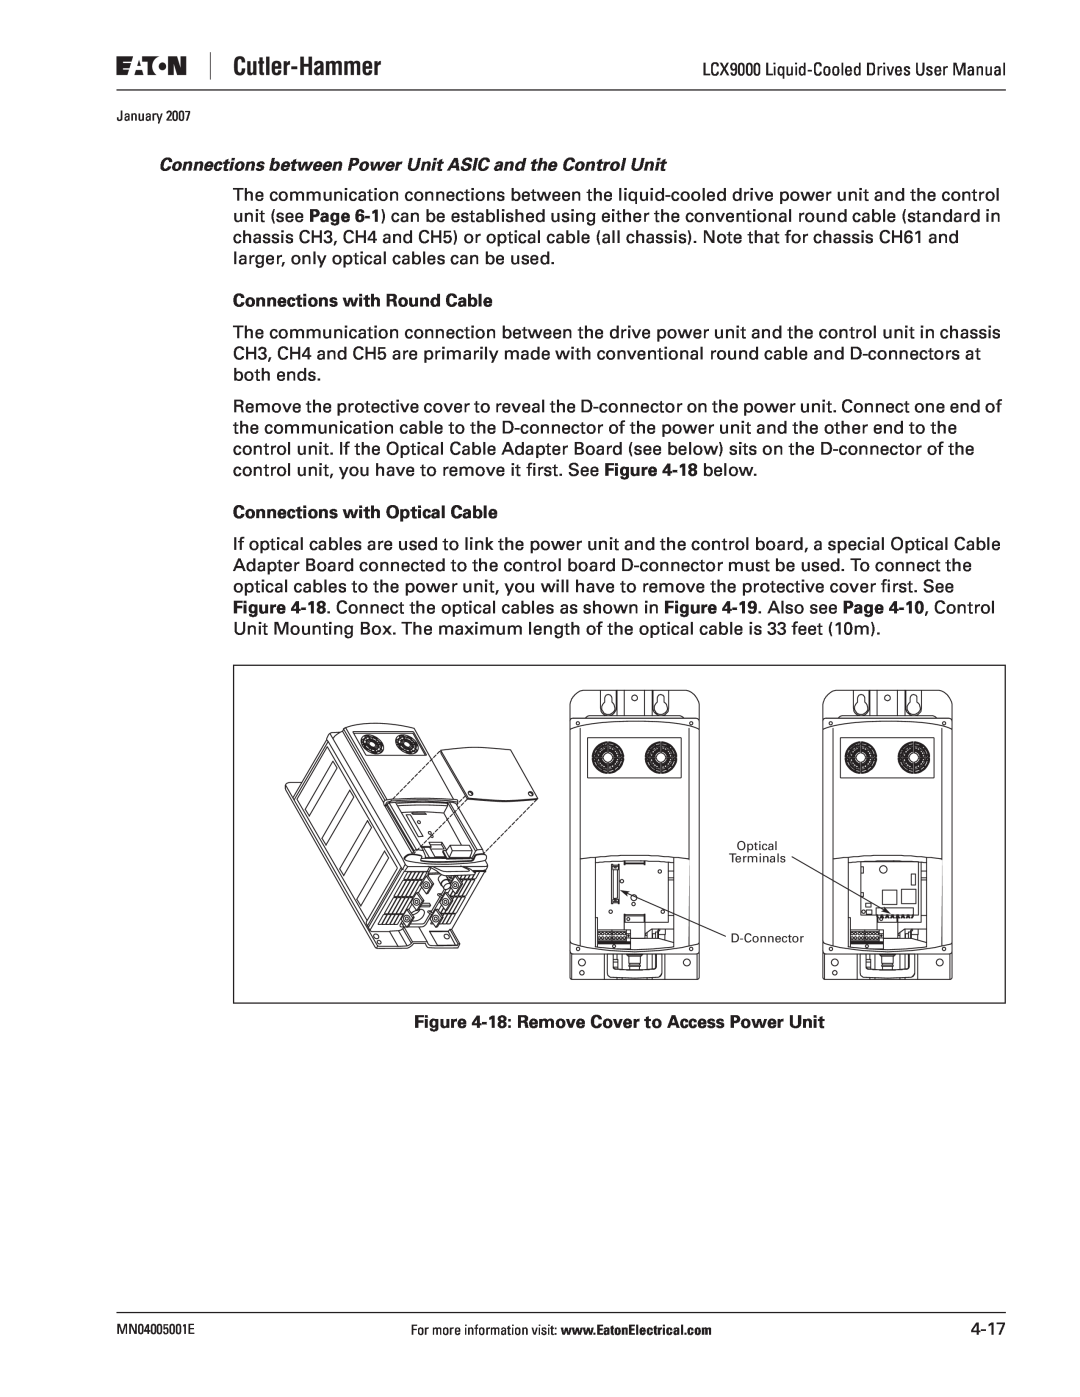 J. T. Eaton LCX9000 user manual Connections between Power Unit ASIC and the Control Unit, Connections with Round Cable 